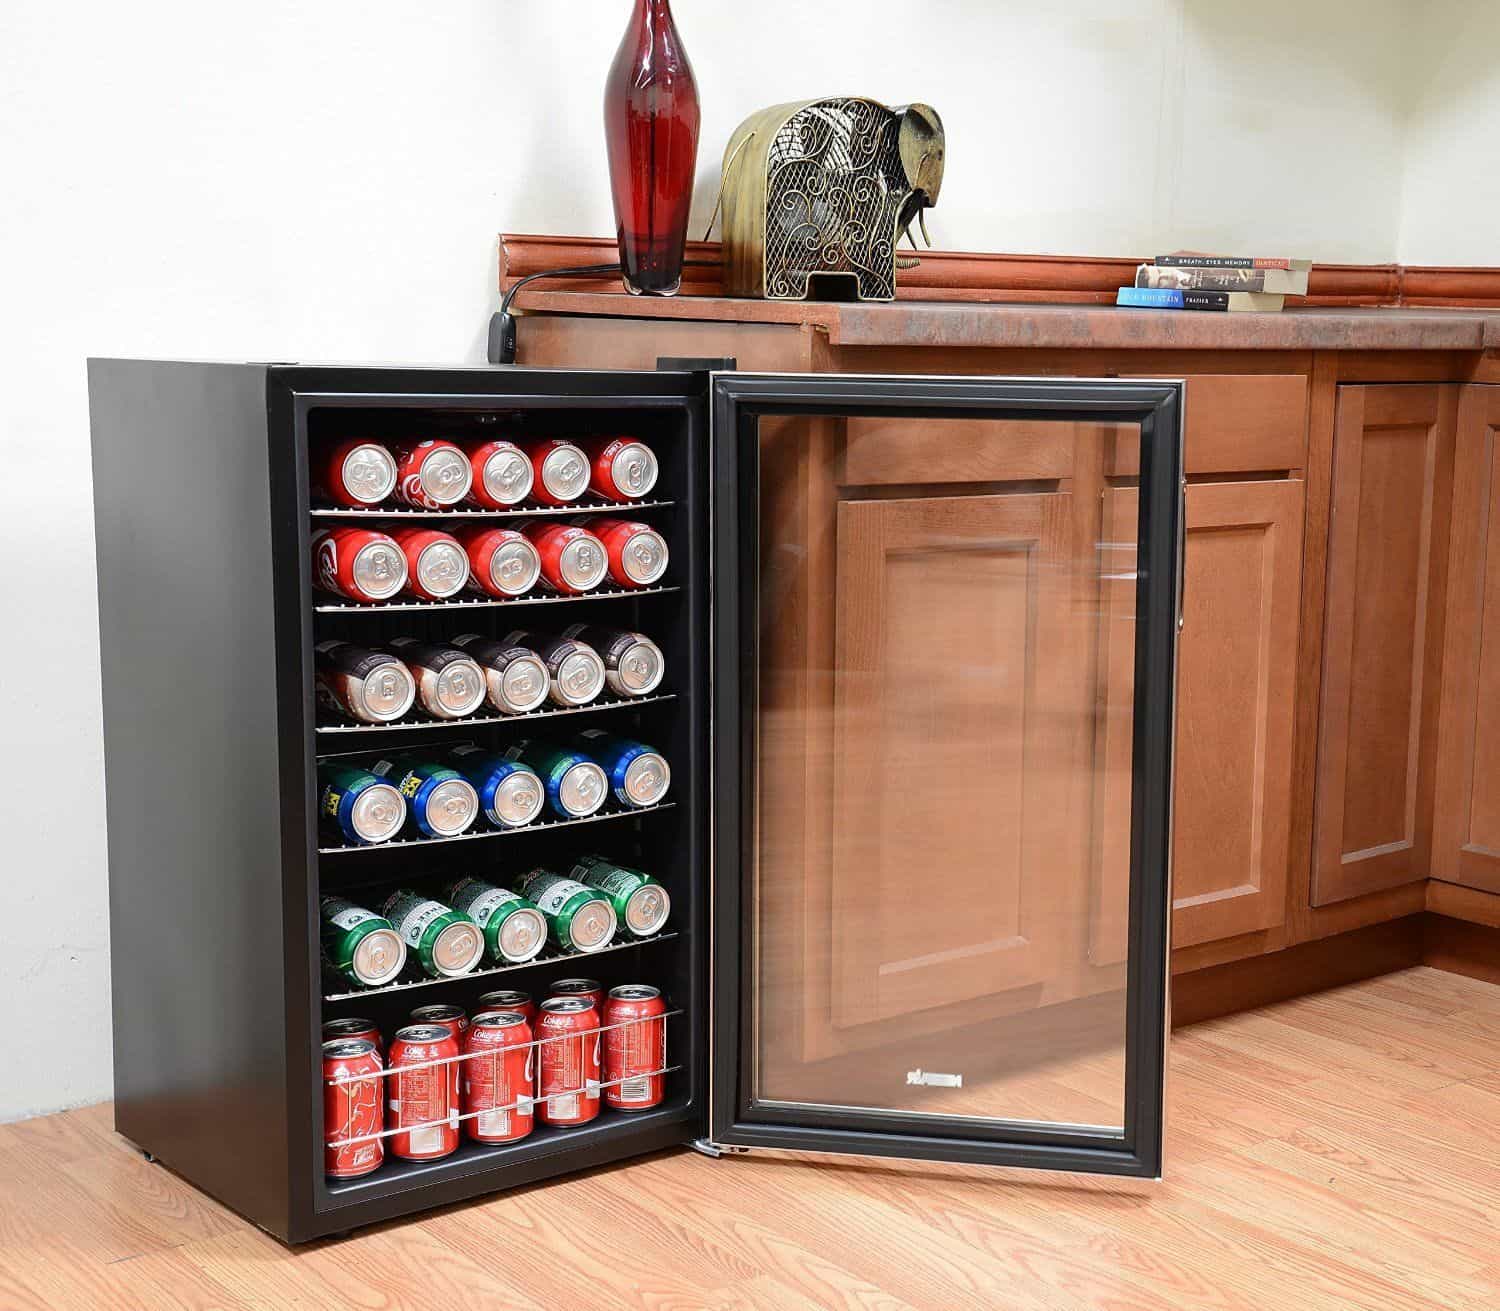 Things to consider when choosing your next beverage fridge - Times Lifestyl...